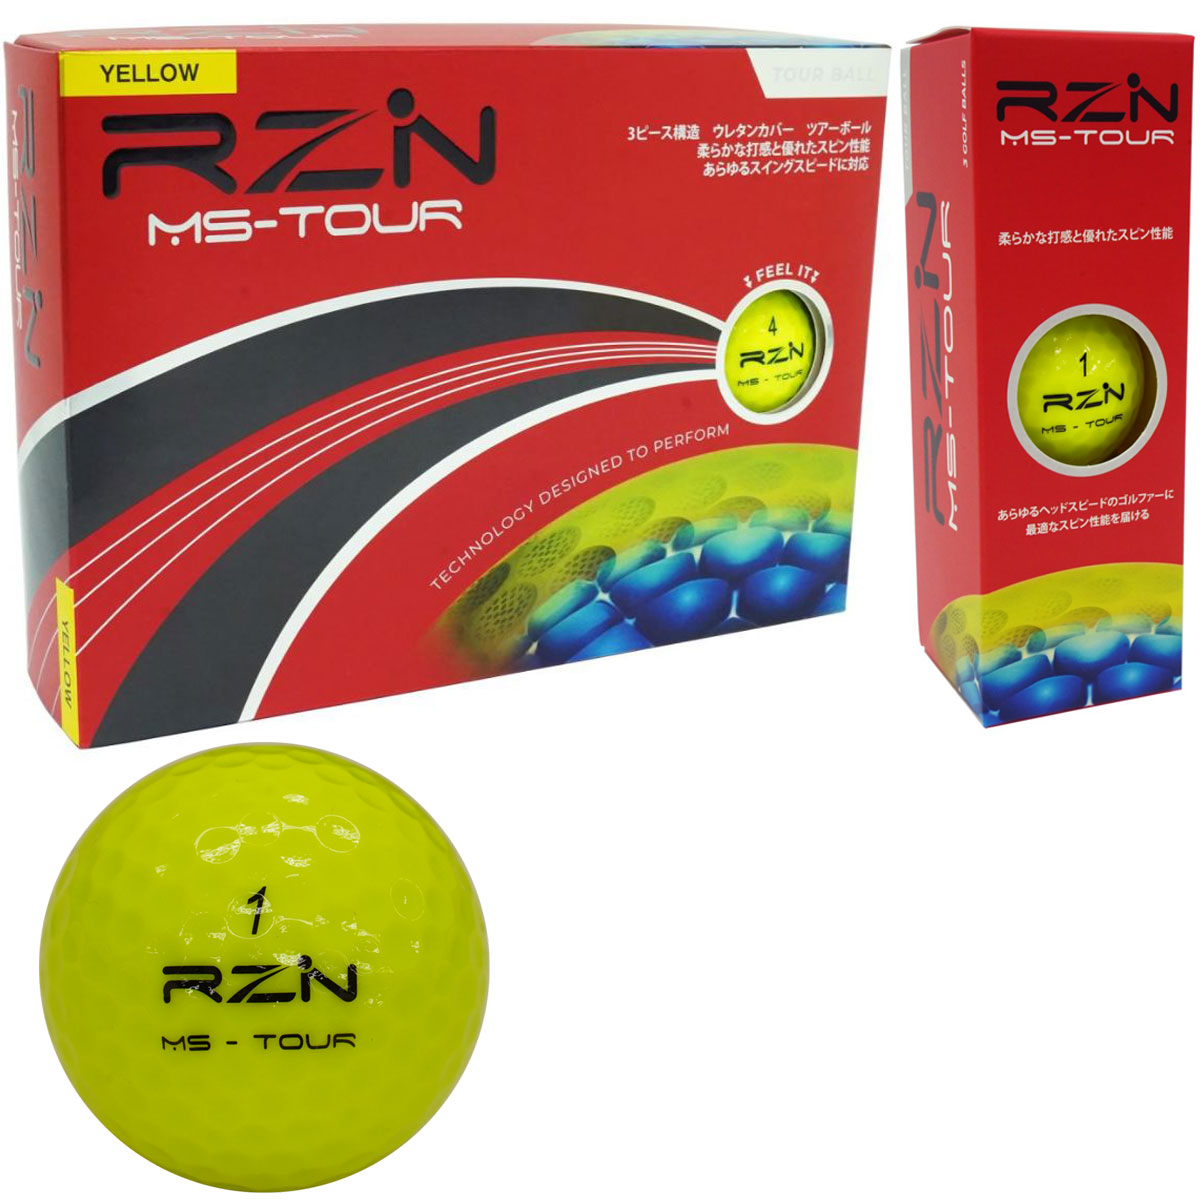 RZN MS-TOUR ボール(ボール（新品）)|その他(その他メーカー) の通販